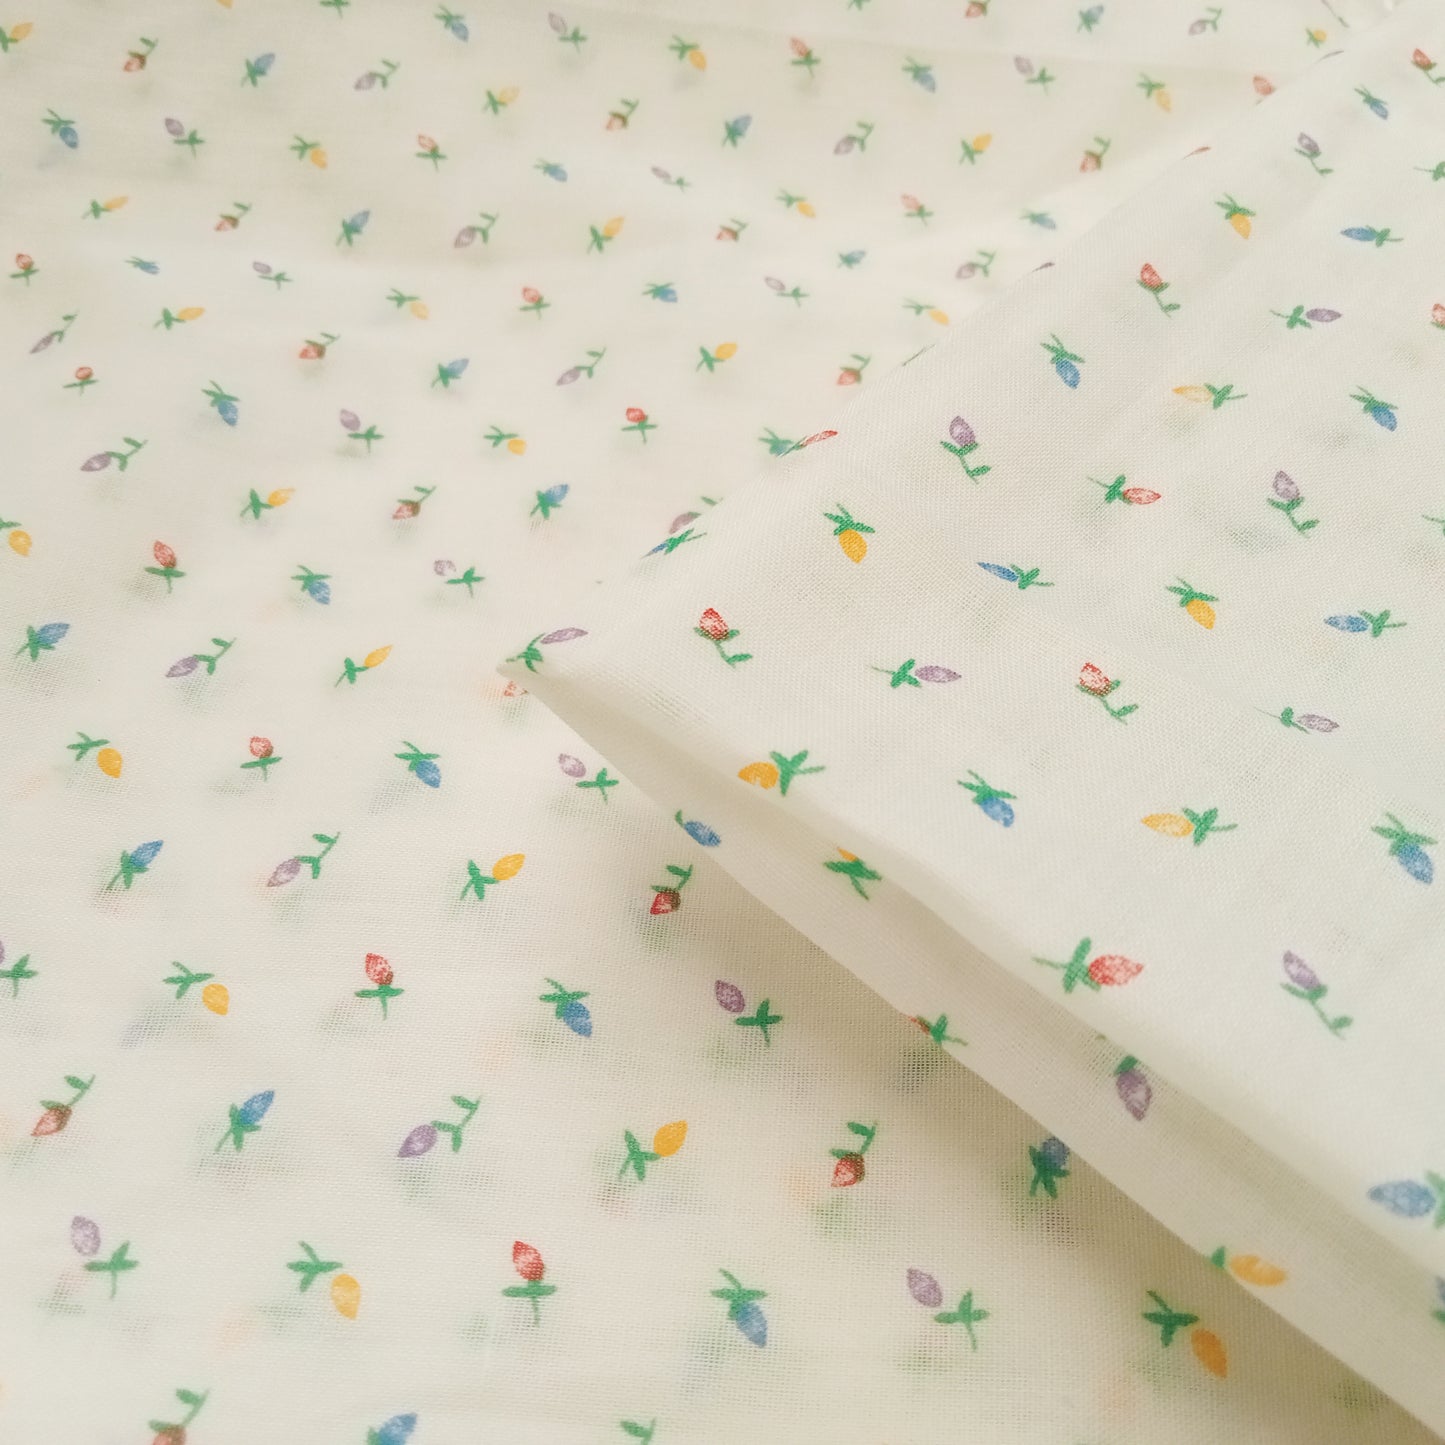 Bulb floral printed cotton fabric - 1.80mtrs